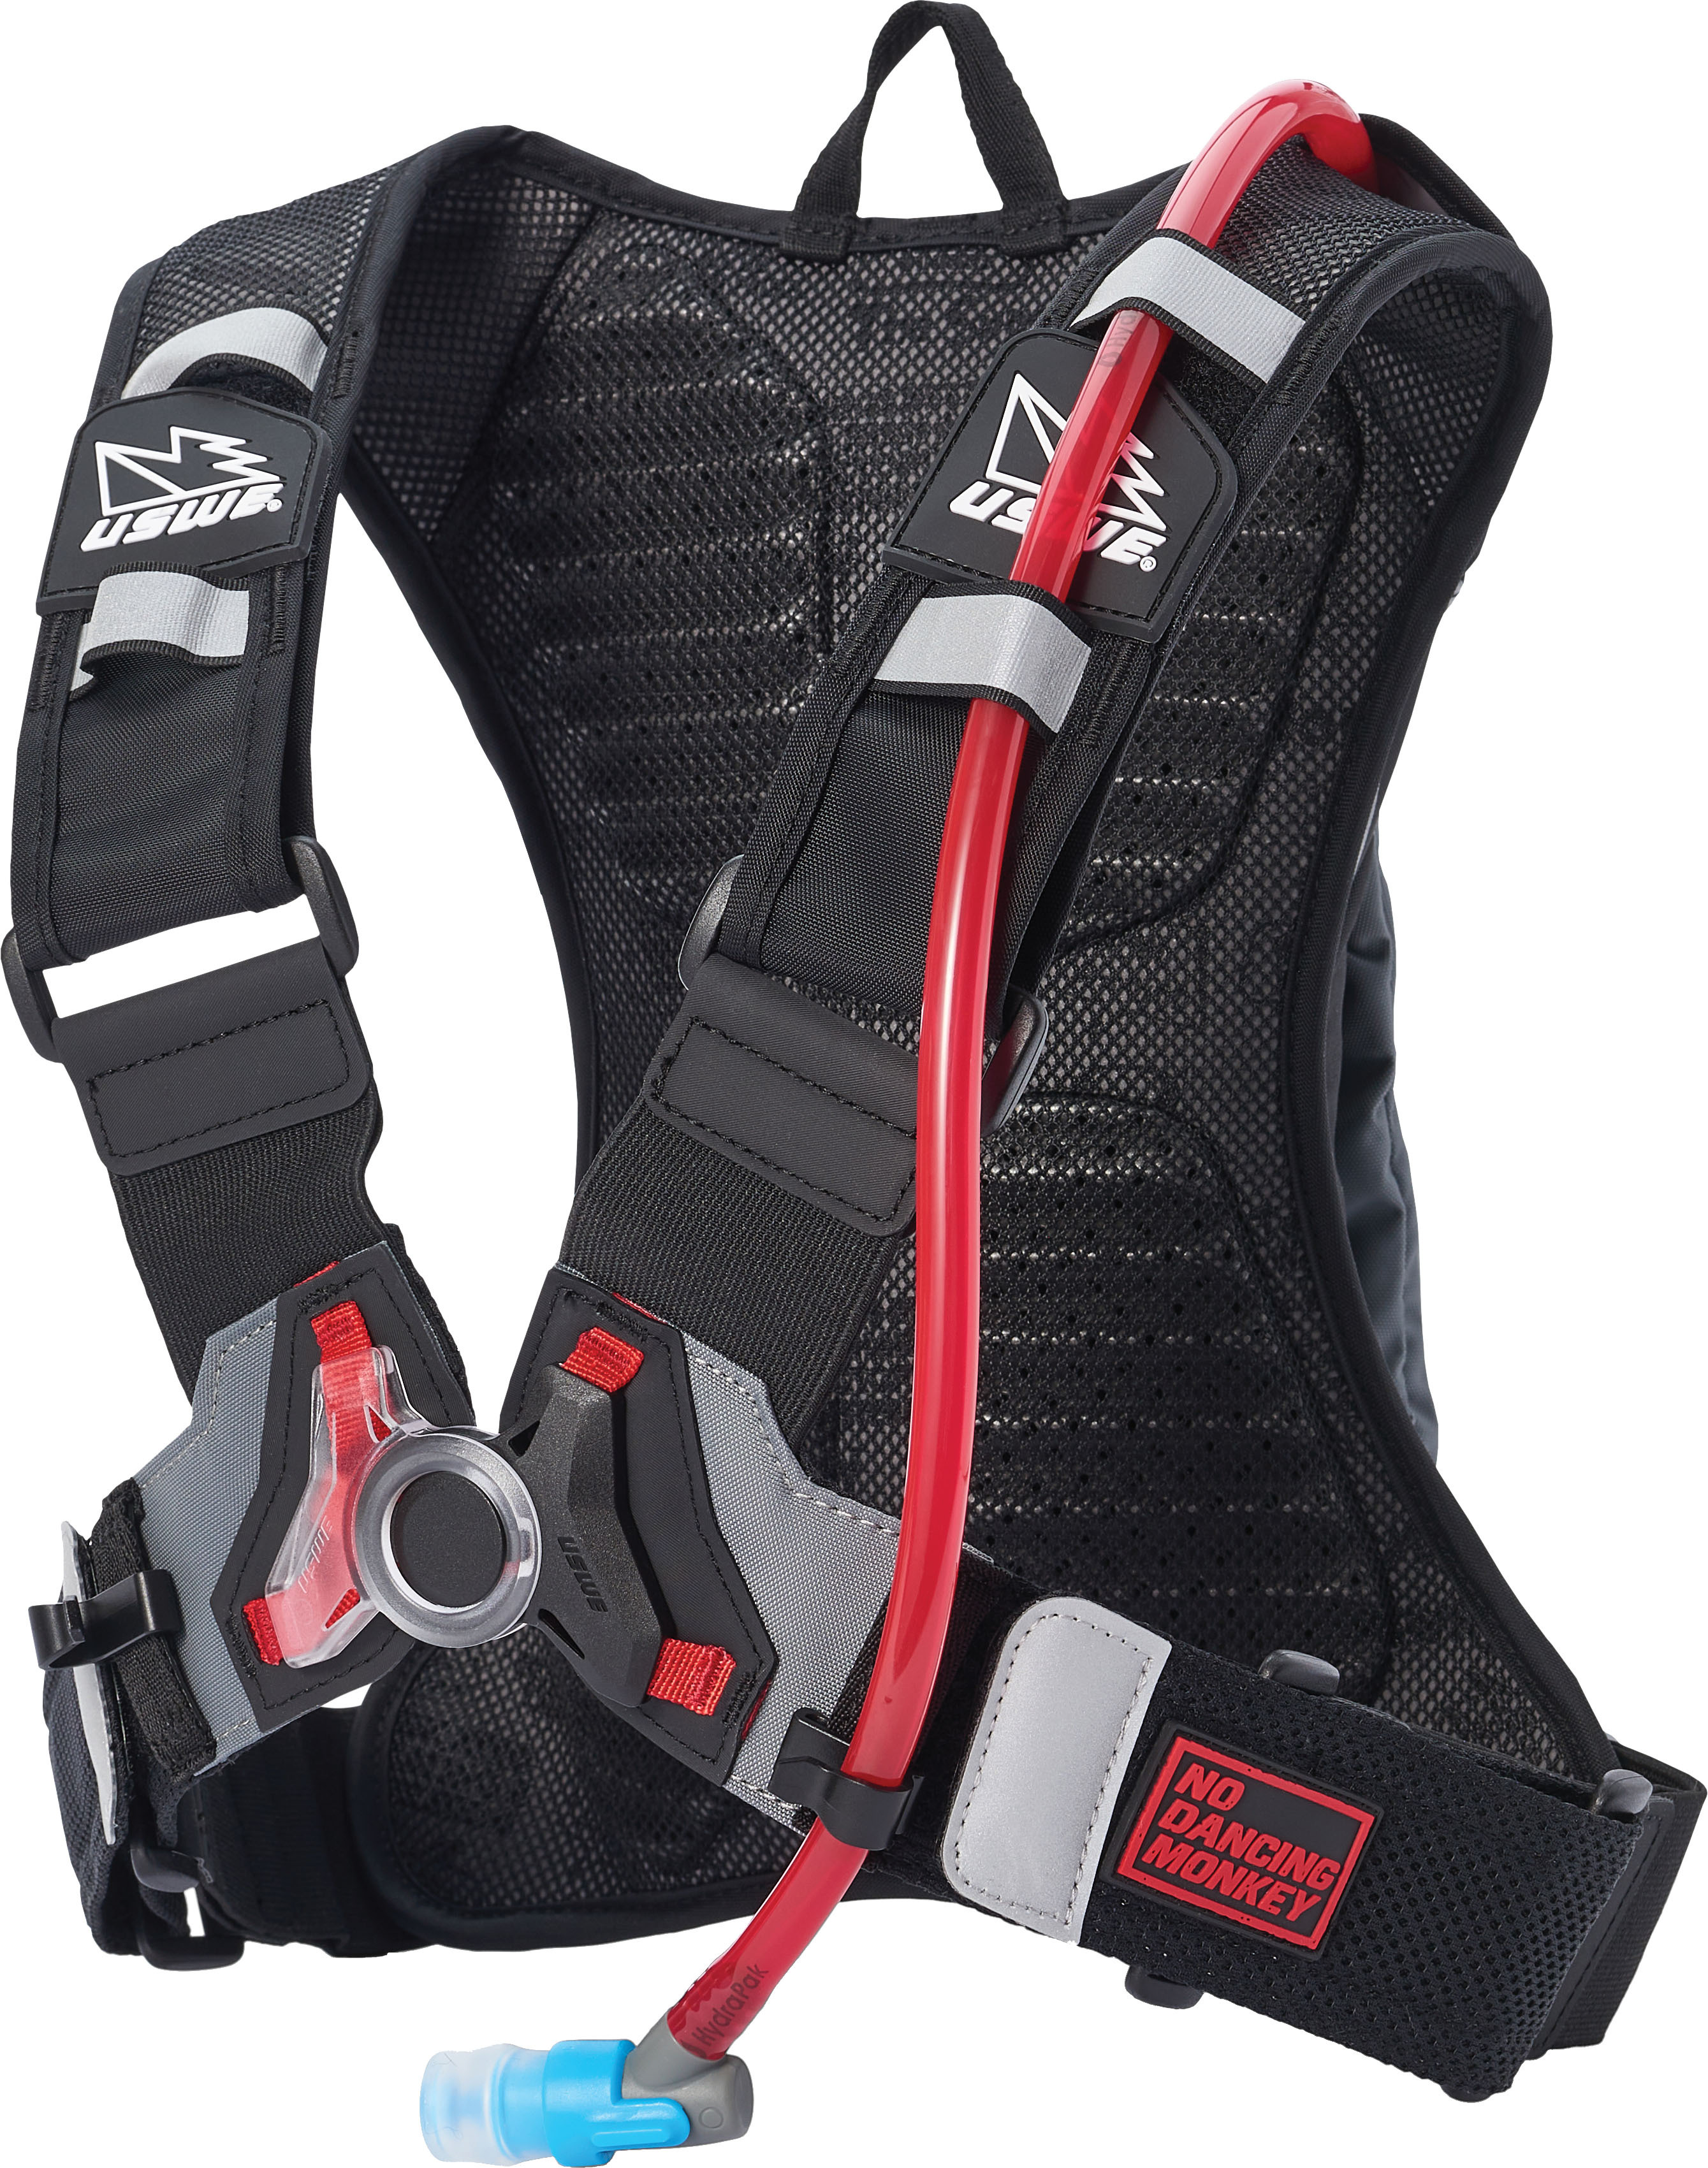 Carbon Black Raw 3 2.0L Hydration Pack w/ Plug-n-Play Tube - Click Image to Close